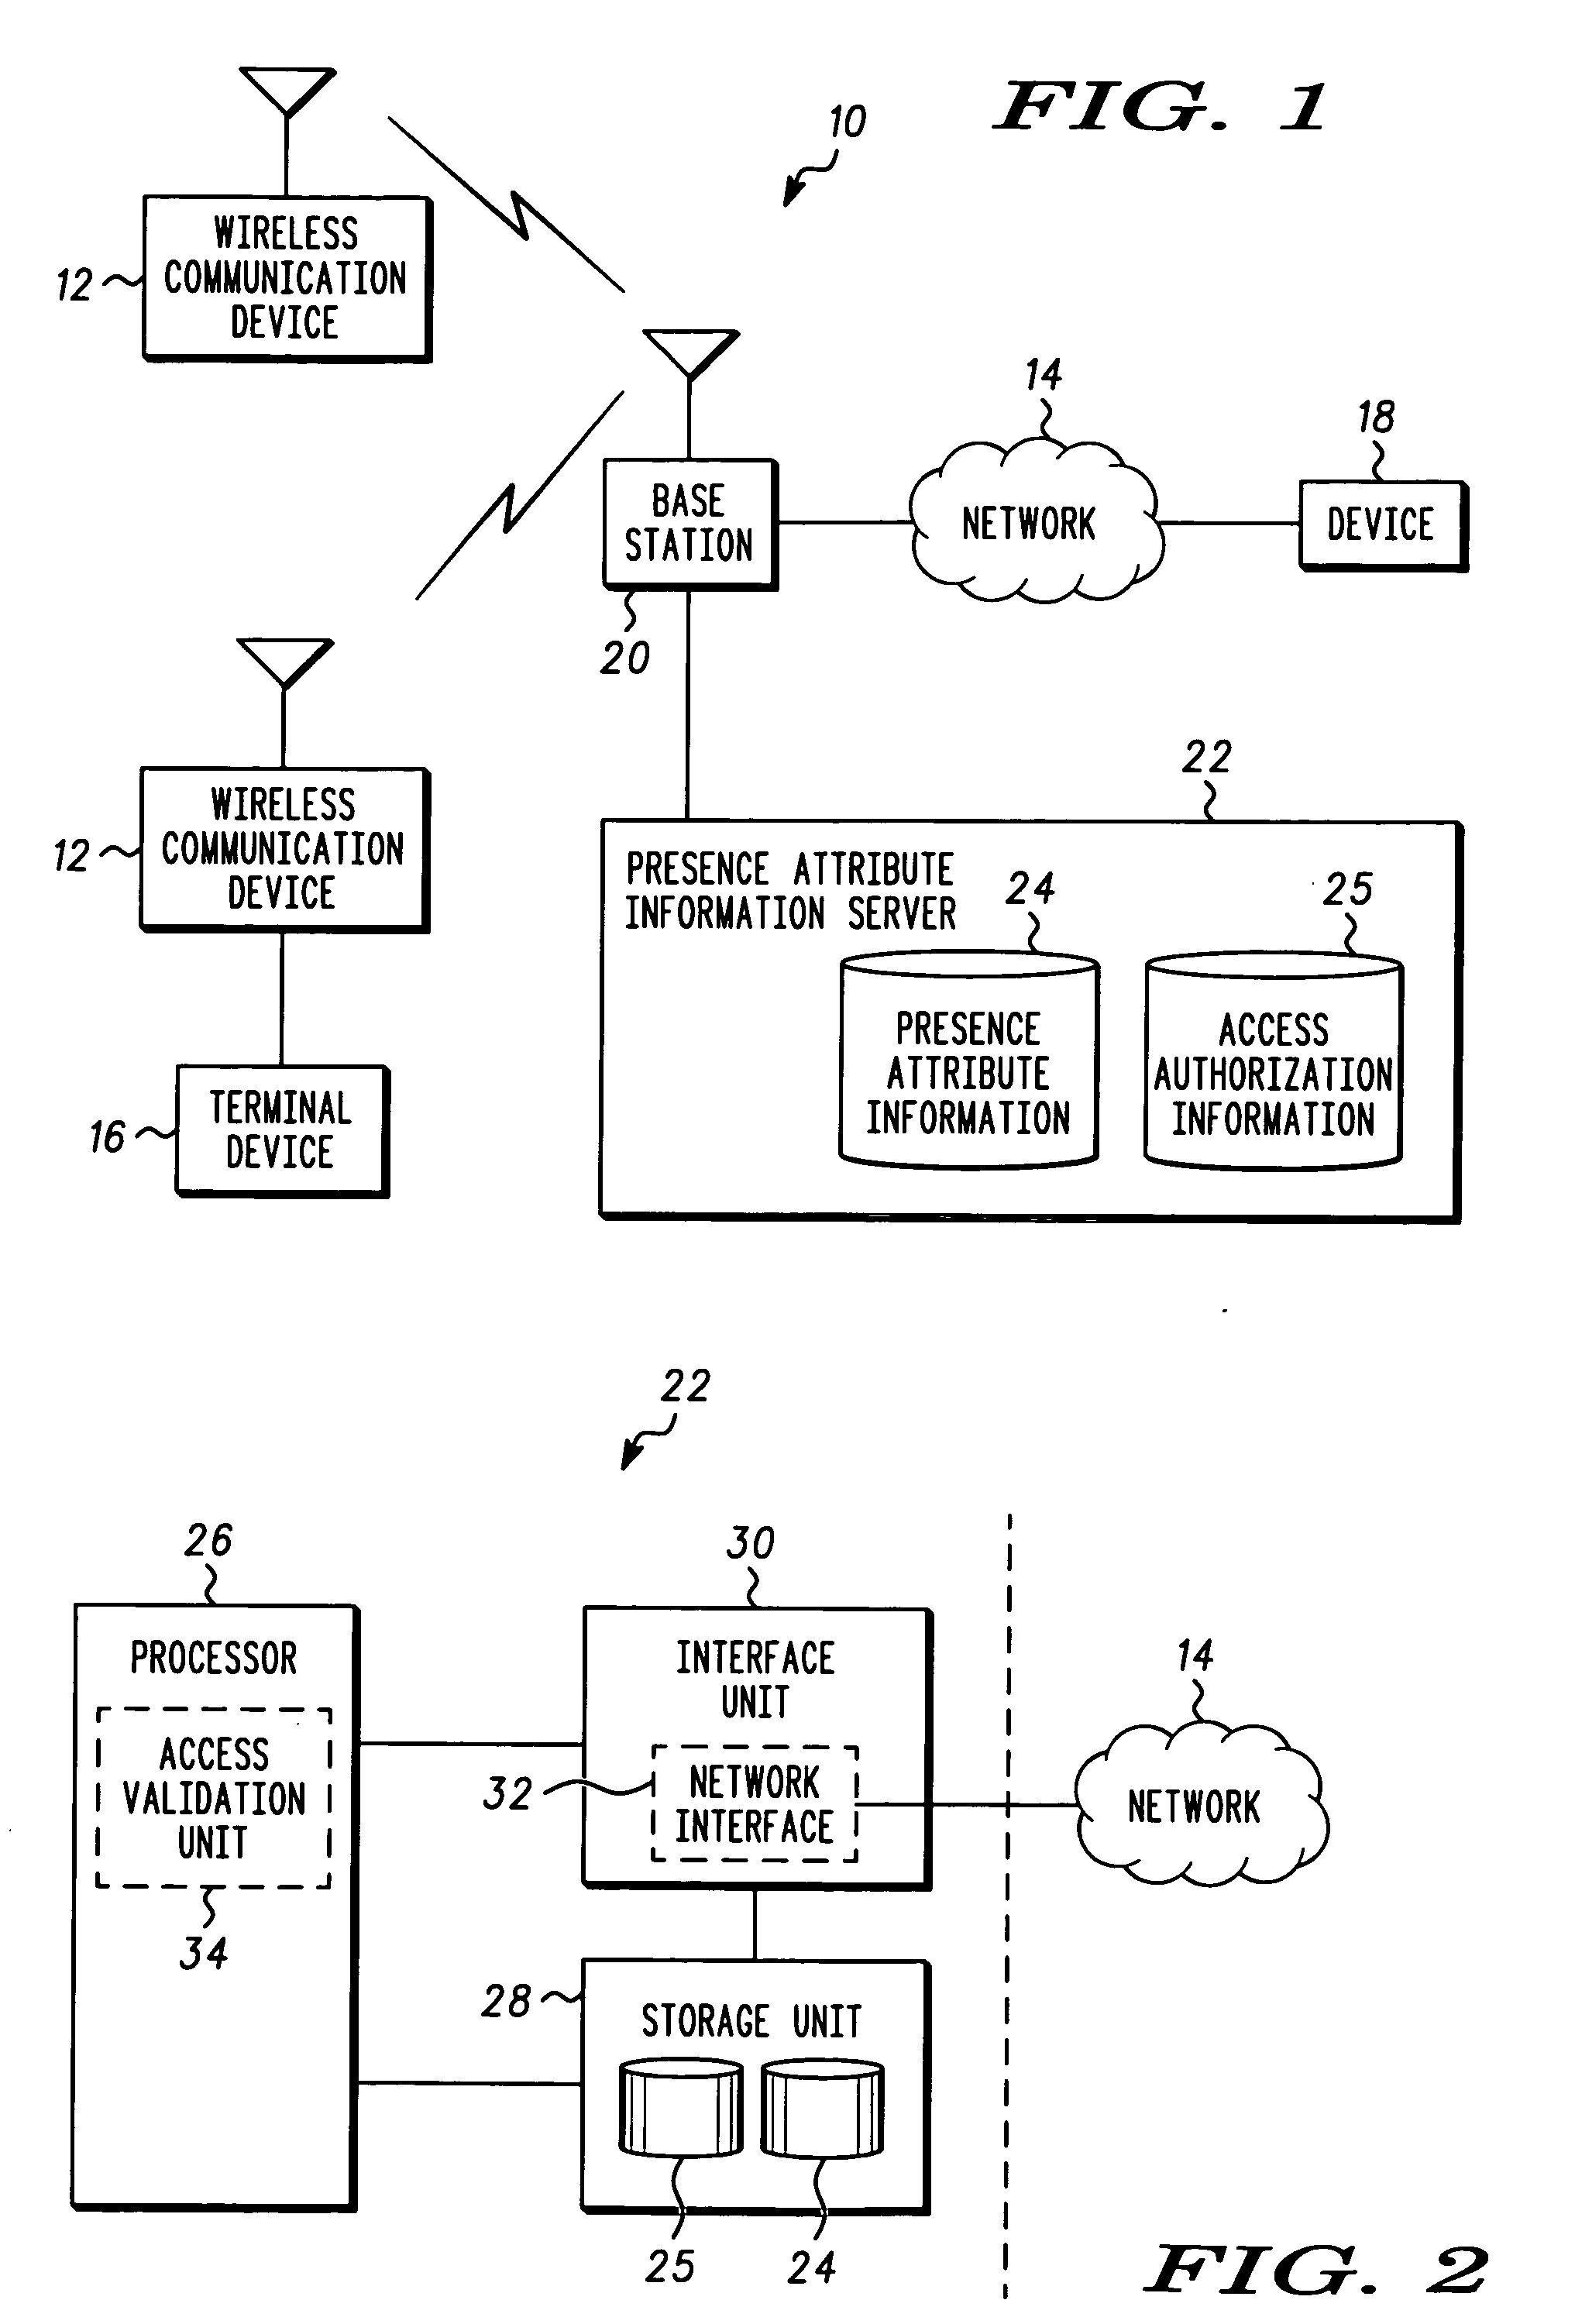 Method and system for managing access to presence attribute information